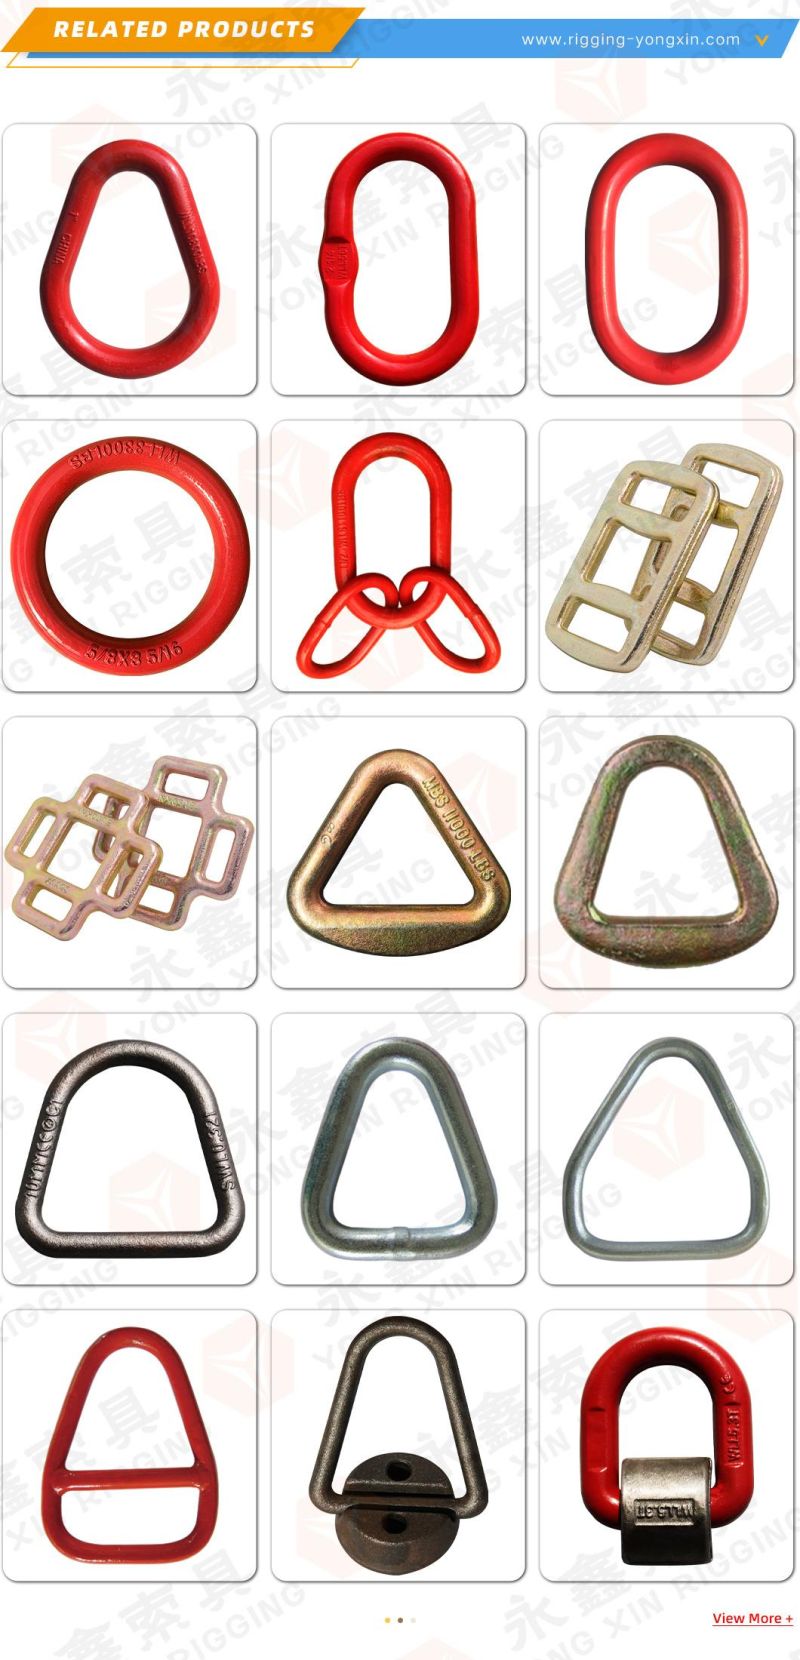 2′ ′ Forged One Way Buckle, One Way Lashing Buckle